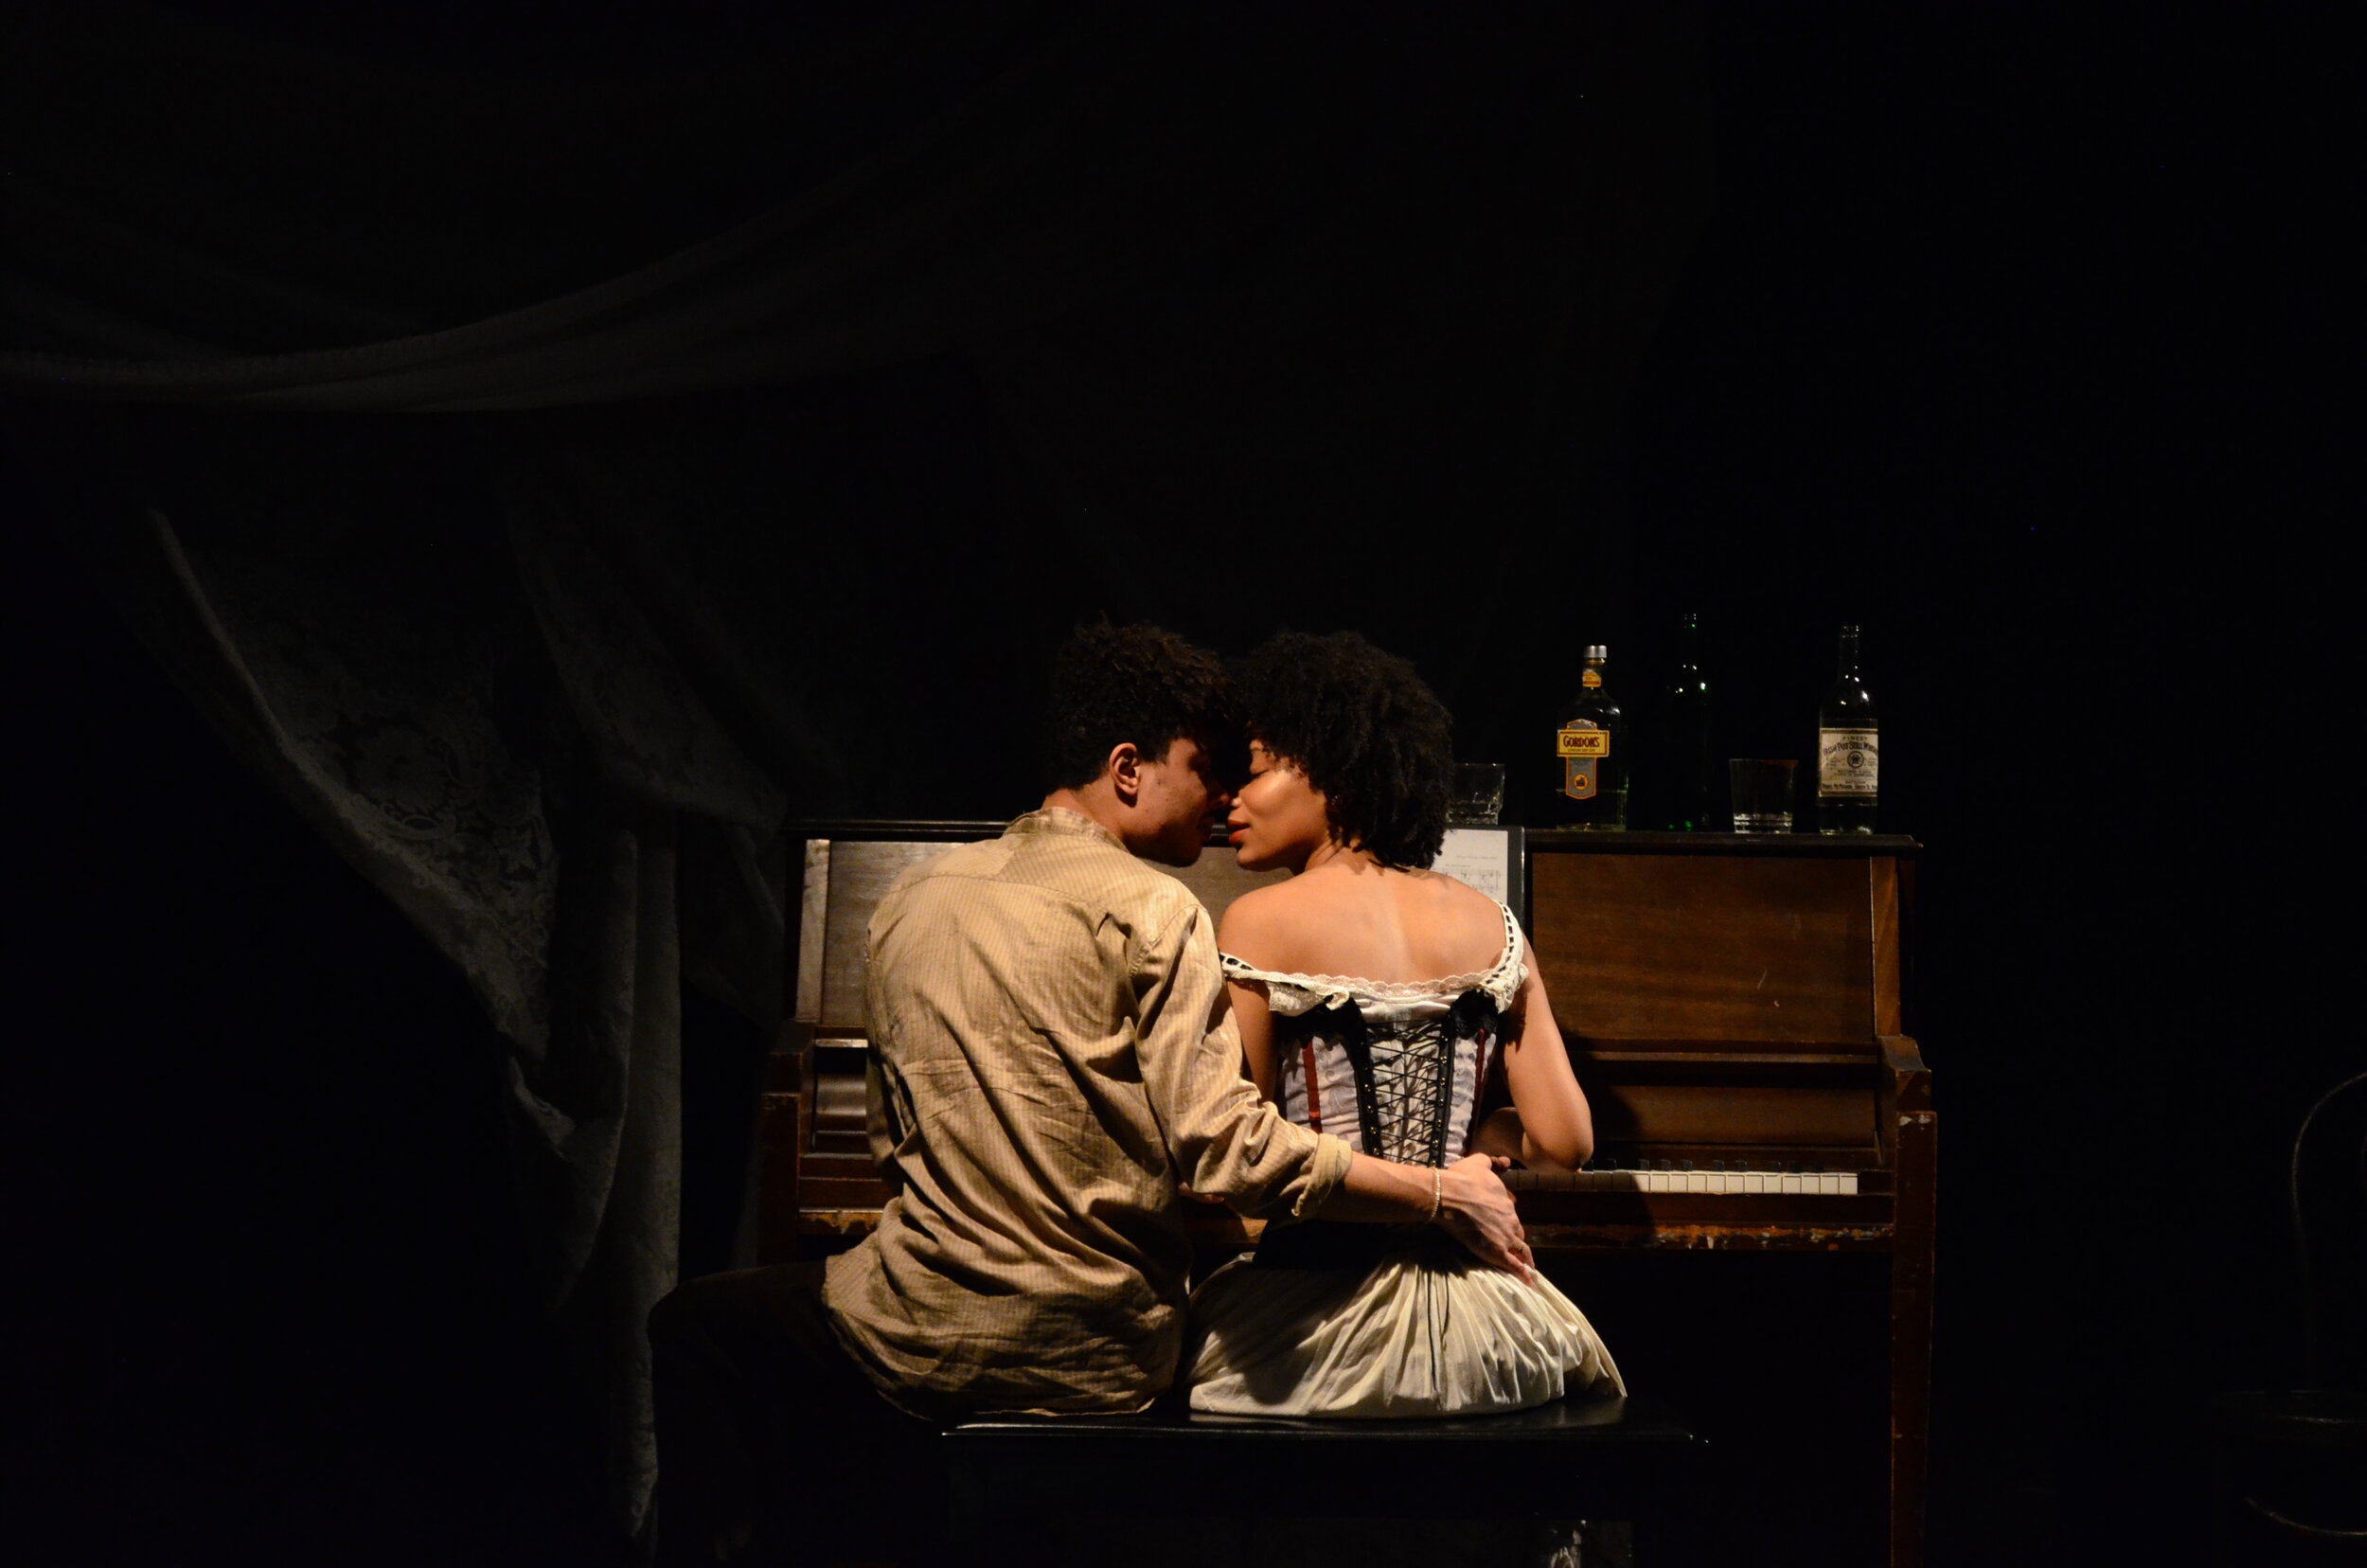  Miles Jordan as George Armstrong and  Tatiana Webster  as Mamie in INTIMATE APPAREL, directed by Avital Shira.  Photo by  Stephanie Lynn Yackovetsky . 